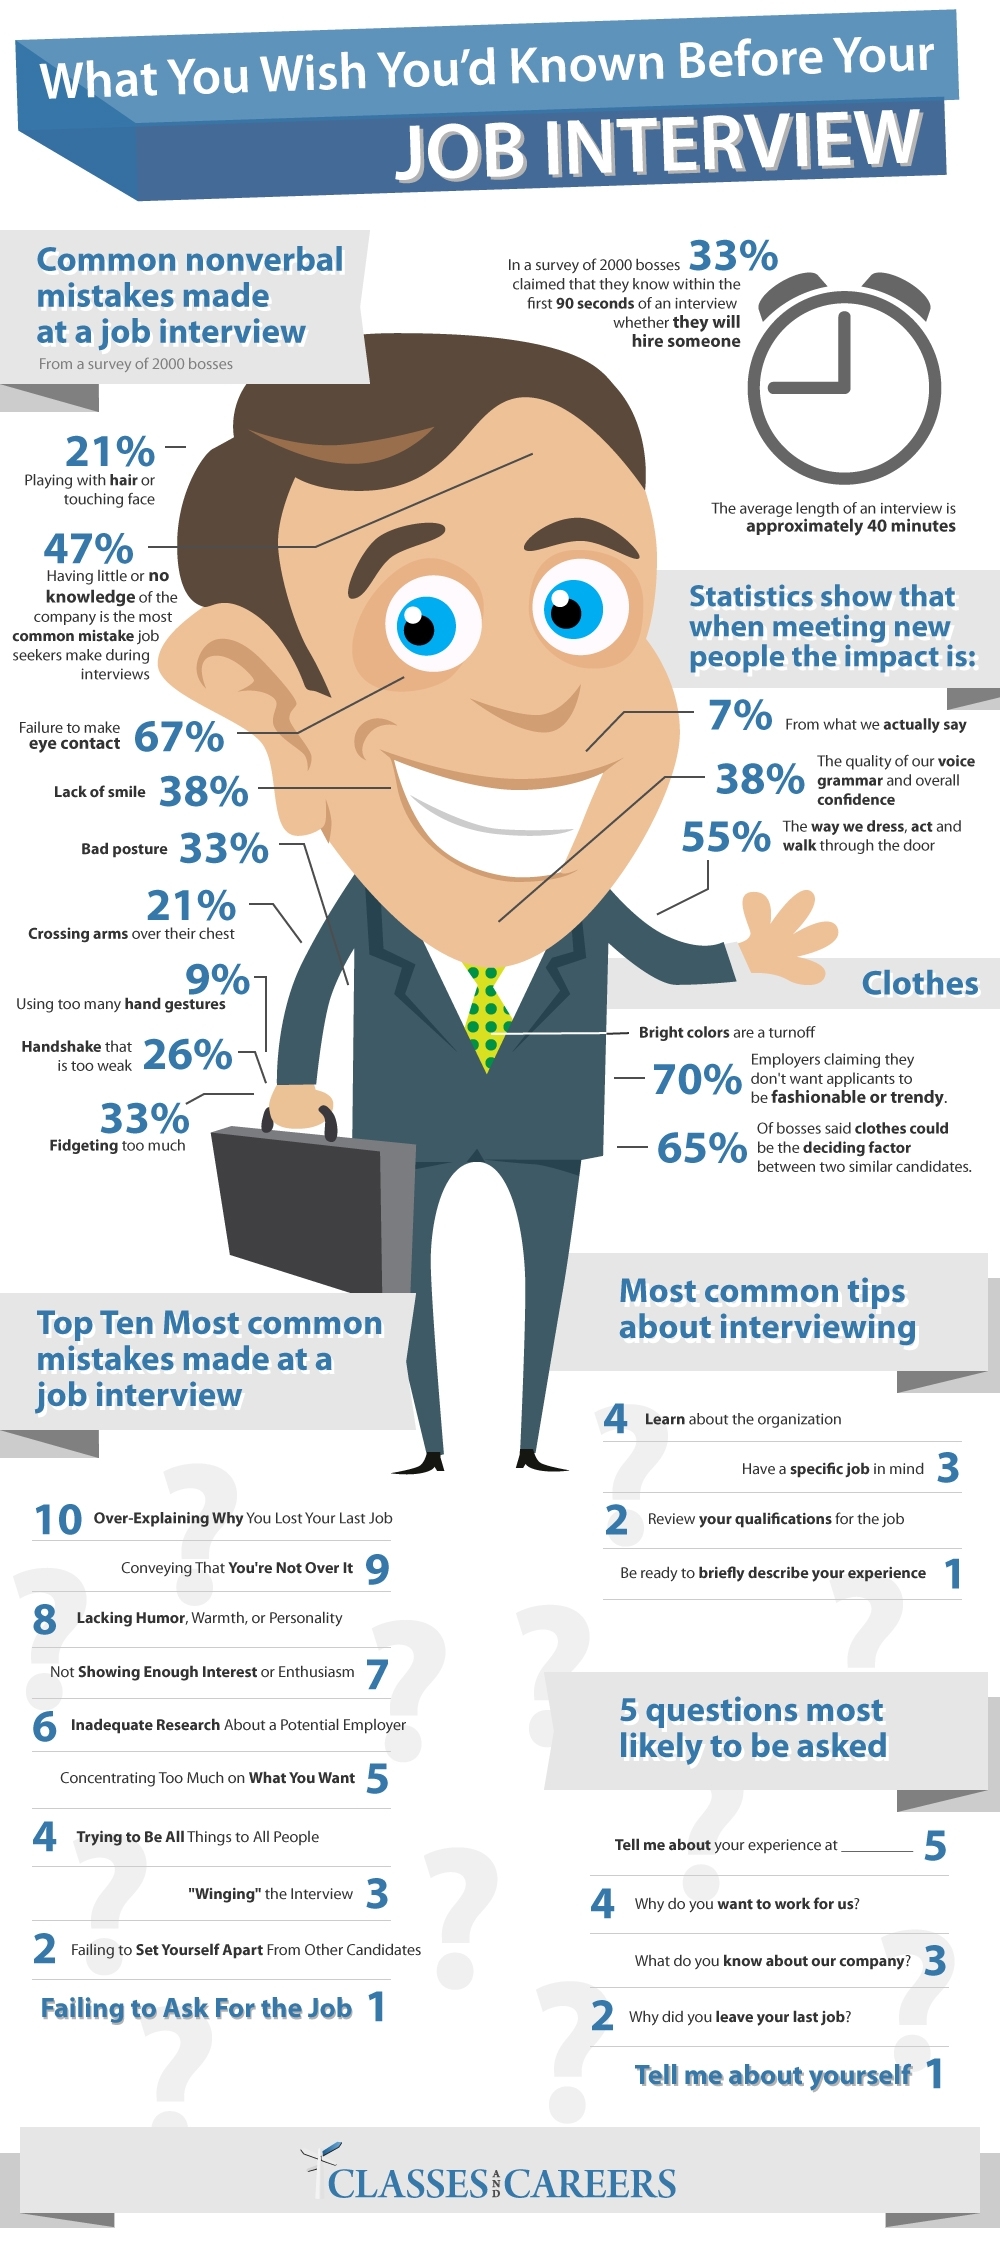 What You Wish You’d Known Before Your Job Interview